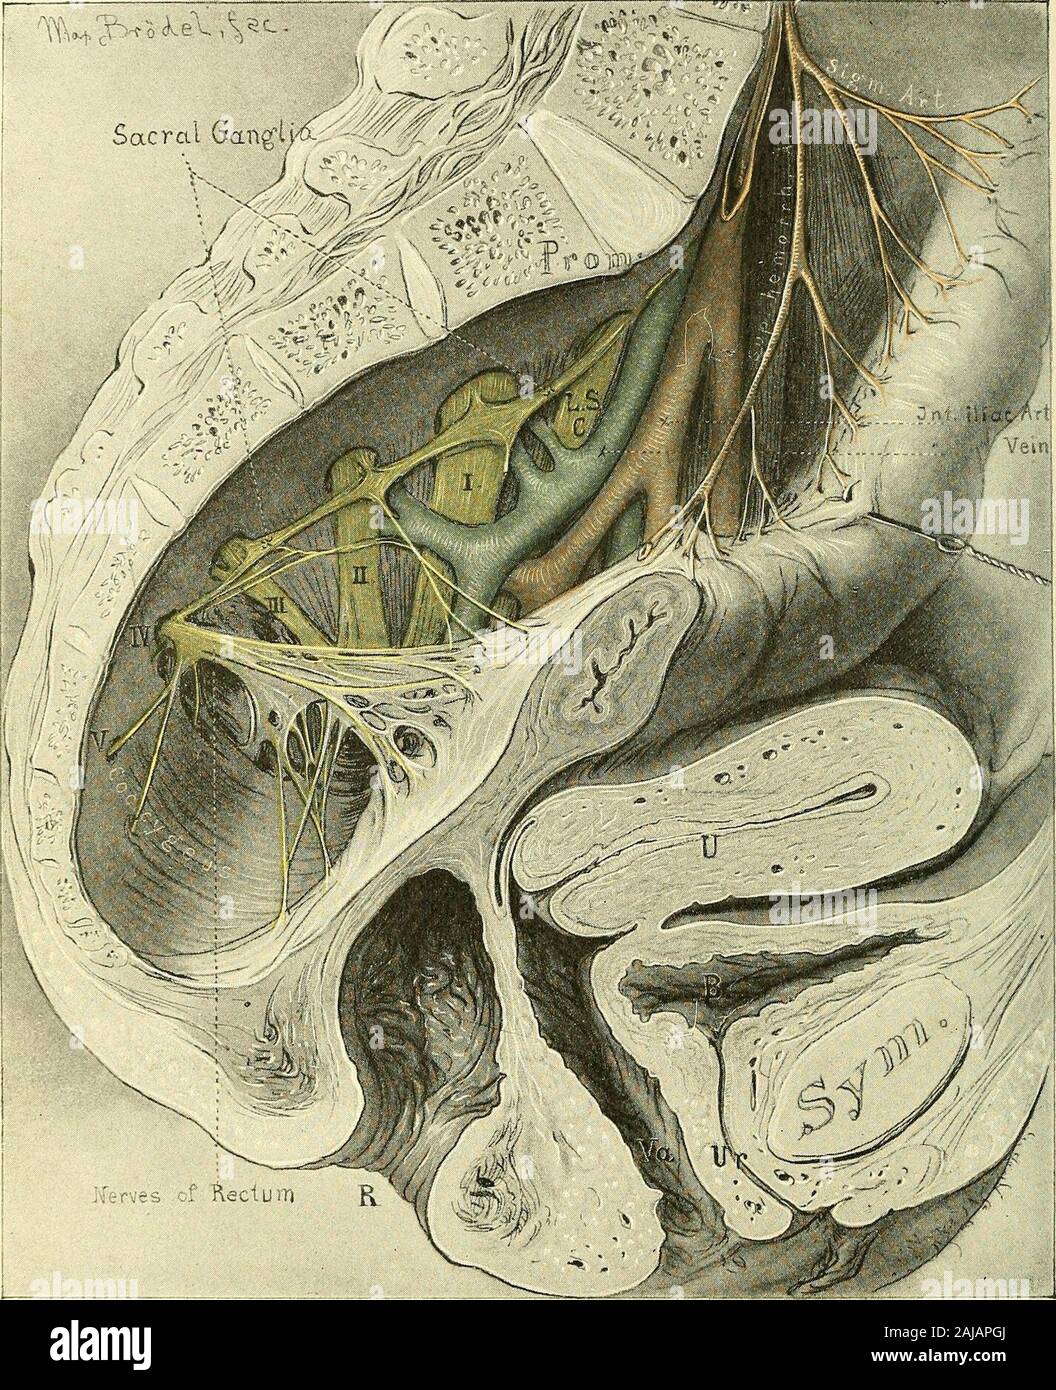 Operative gynecology : . Fig. 37.—The Topography of the Fixed Part of the Bladder. The Vesical Cornua lie to theRight and Left of the Ureteral Orifices, Just in Front of the Broad Ligaments. sacral and lateral pelvic regions. The distribution of the superior hemor-rhoidal vessels is also seen. The sacral plexus of nerves is seen to emergefrom the sacral foramina, forming the lumbo-sacral cord, and the first, second, 72 TOPOGRAPHICAL ANATOMY. third, fourth, and fifth sacral cords, which converge toward the great sacro-sciatic foramen, to unite in the sciatic nerve. The sacral ganglia of the. Fi Stock Photo